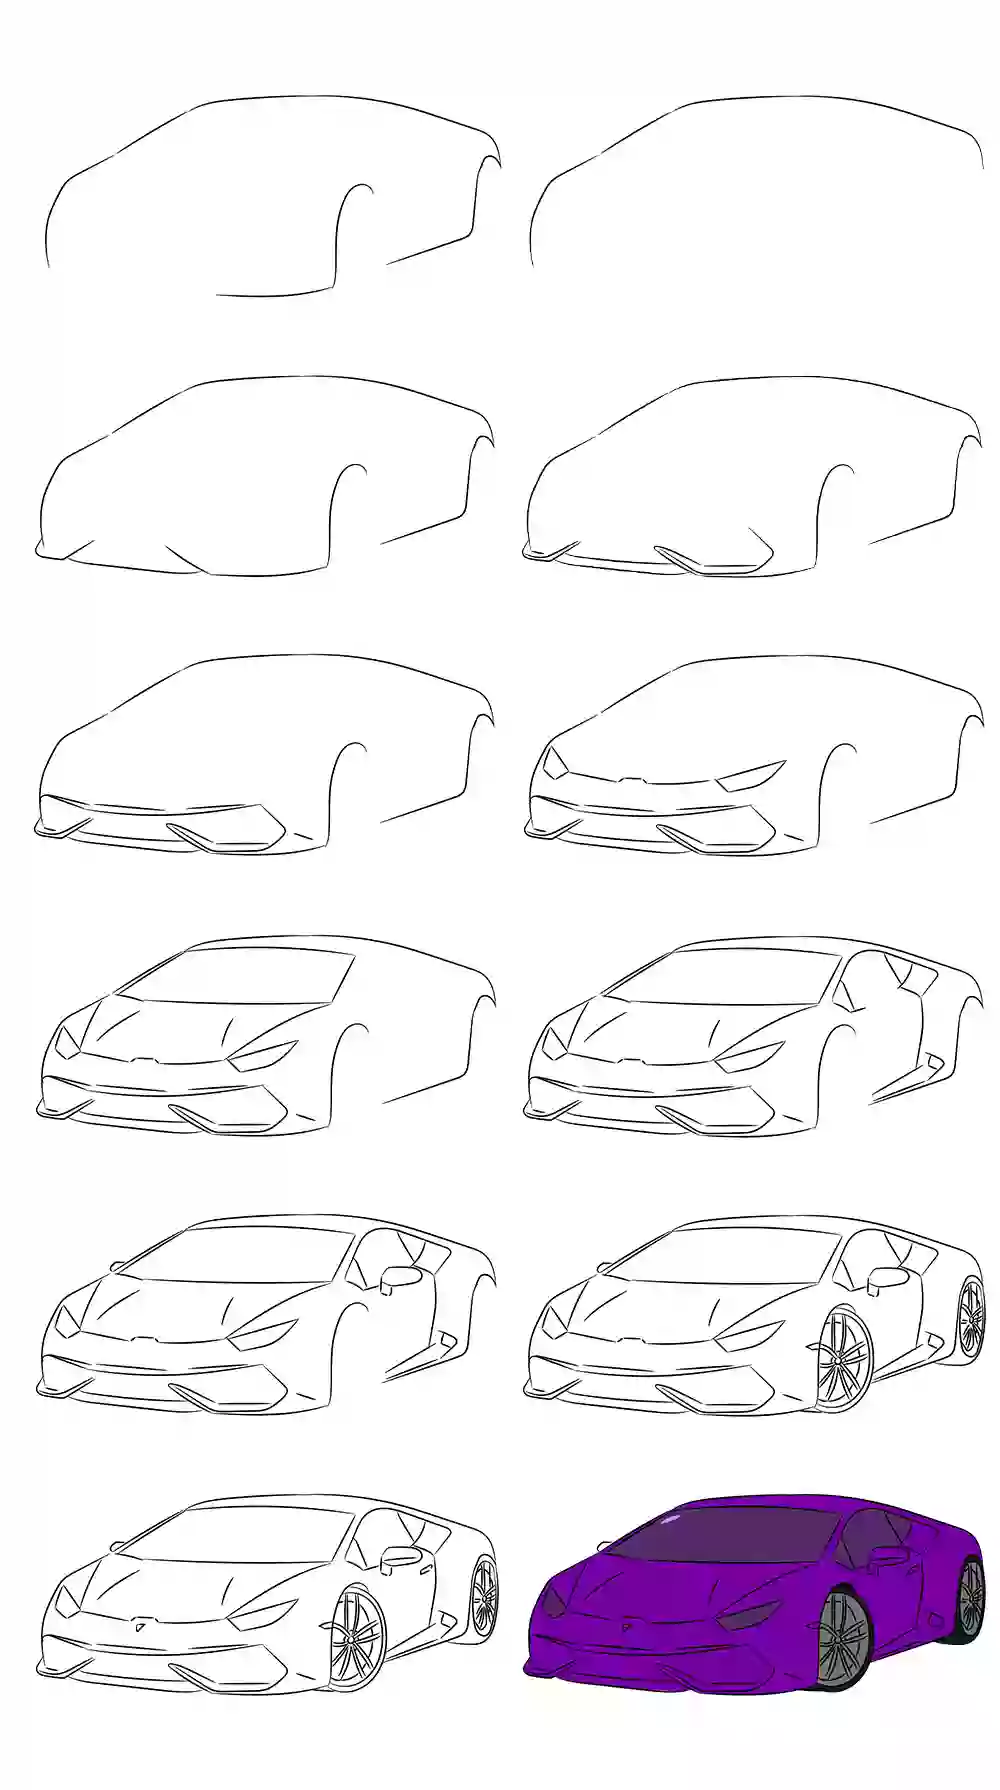 How to Draw Vehicles in Perspective a StepbyStep Guide  GVAATS WORKSHOP